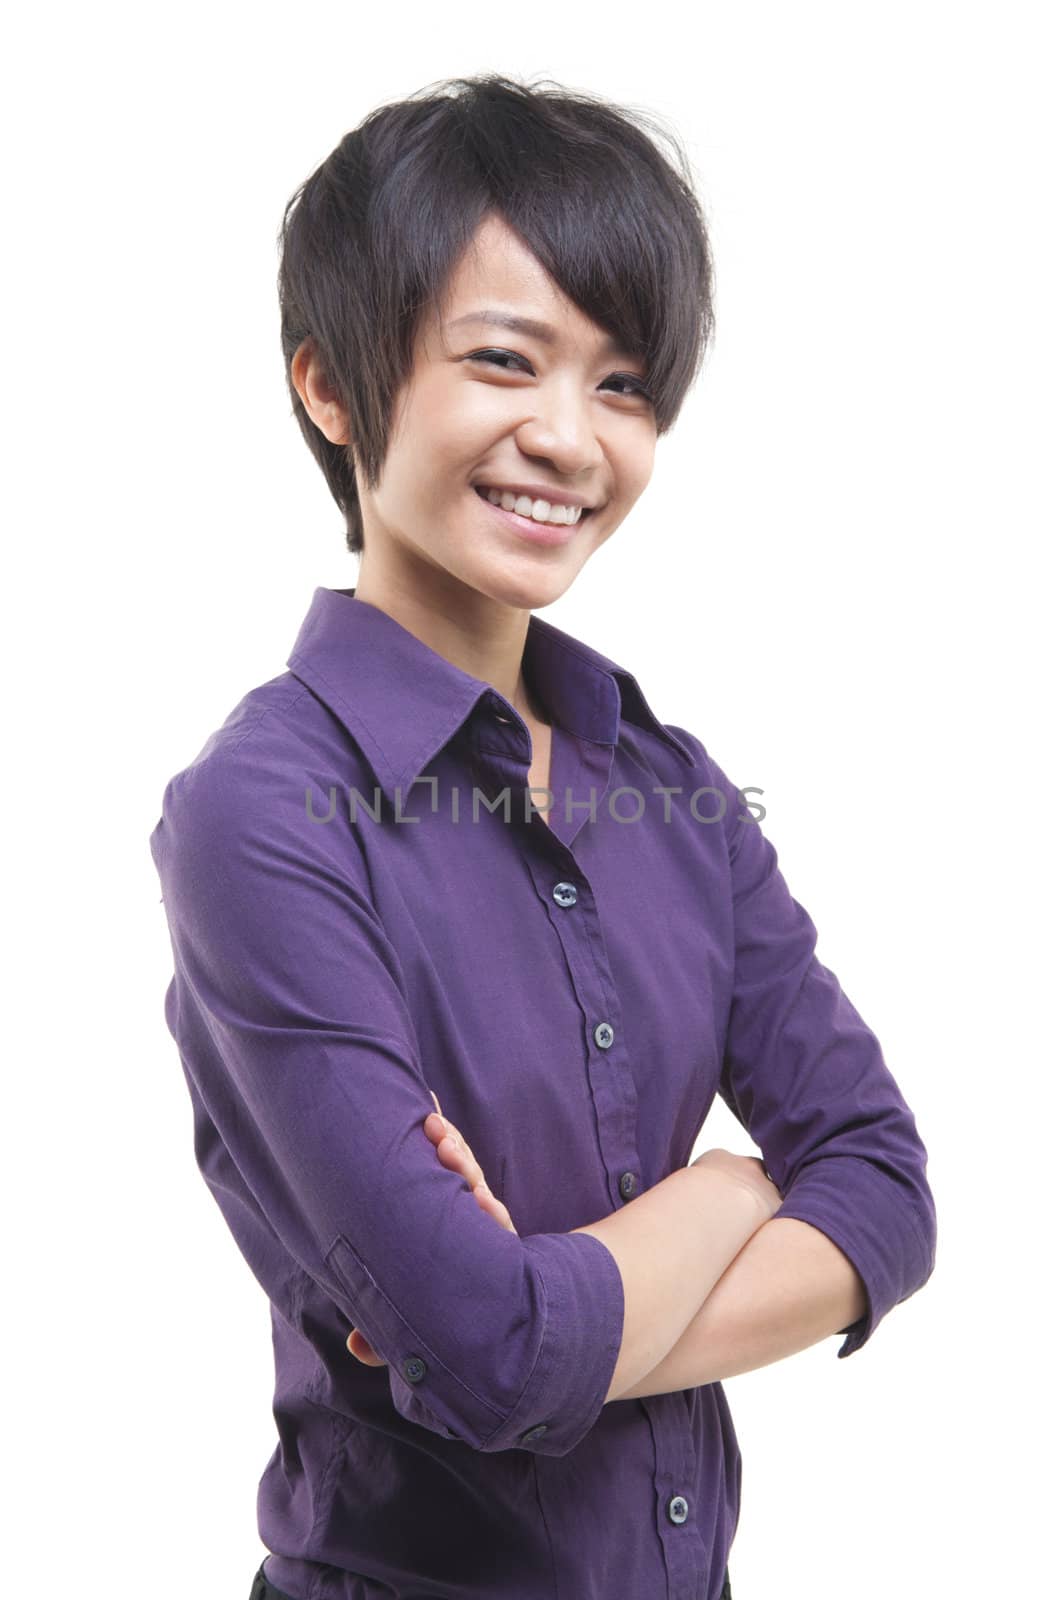 Short hair Asian Educational/Business woman on white background